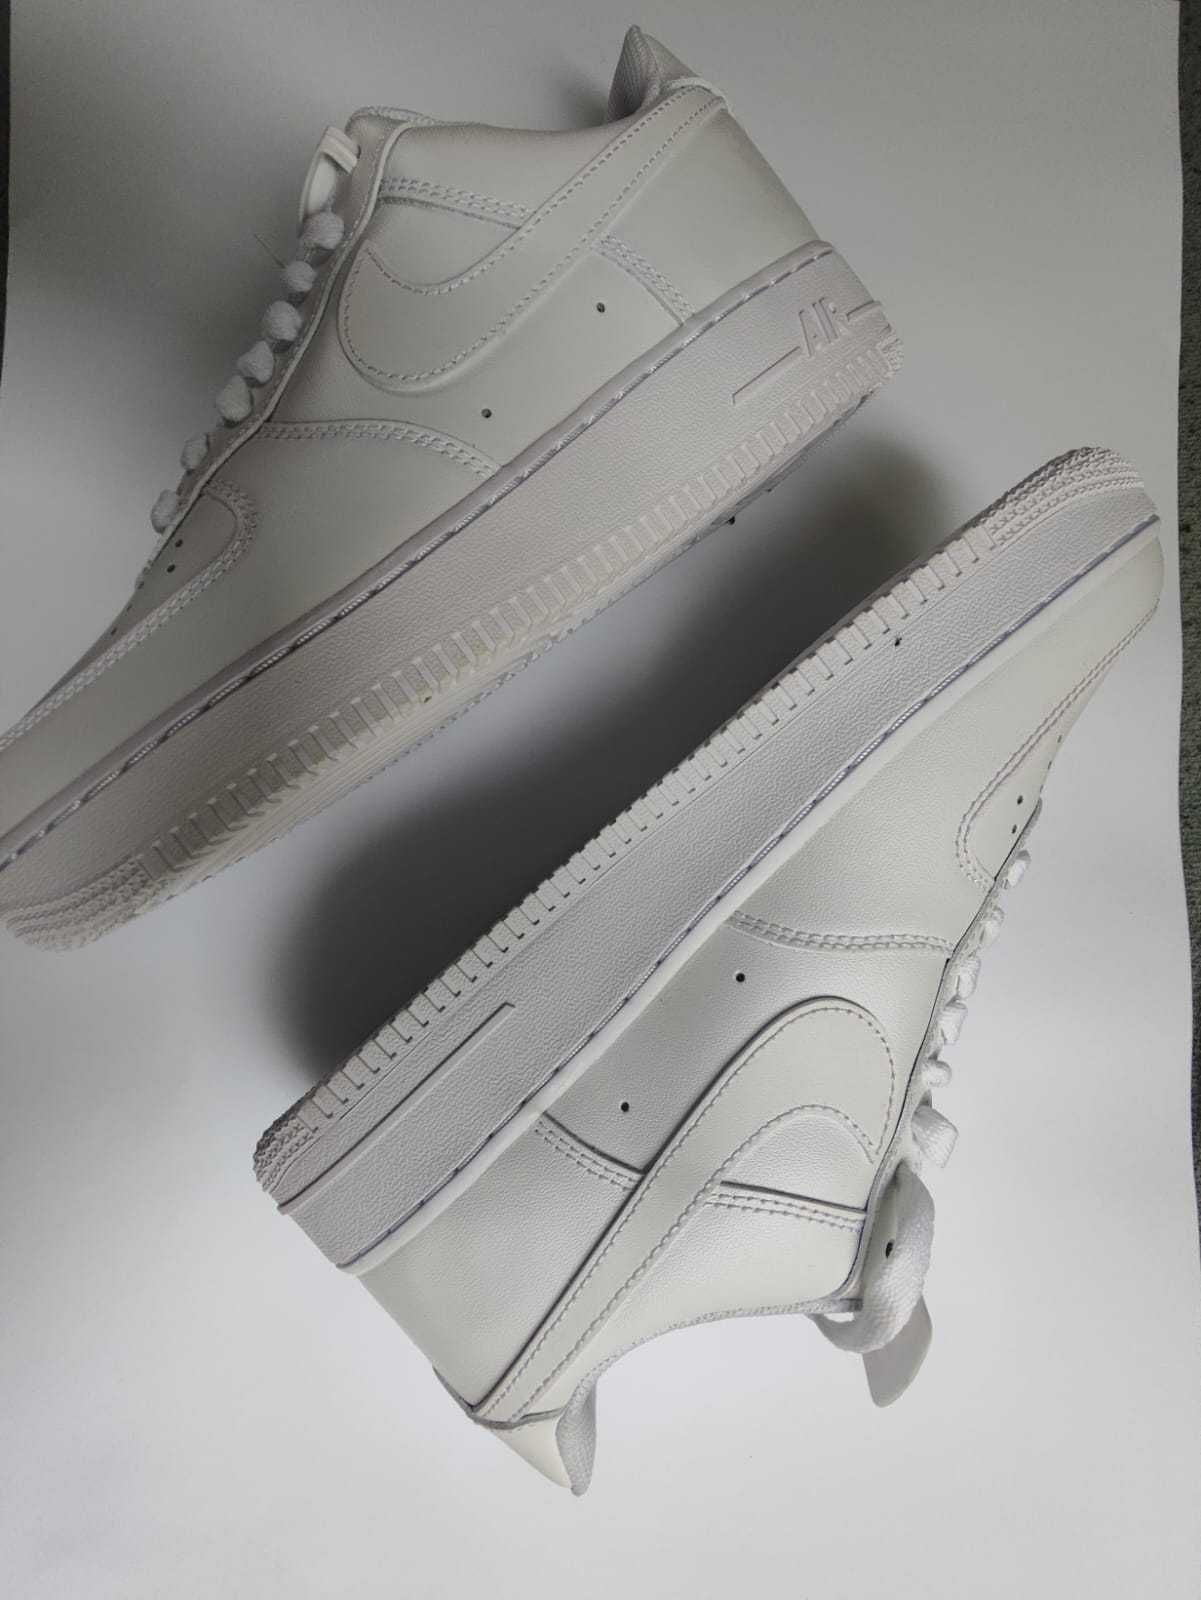 Air force 1 (43 size)